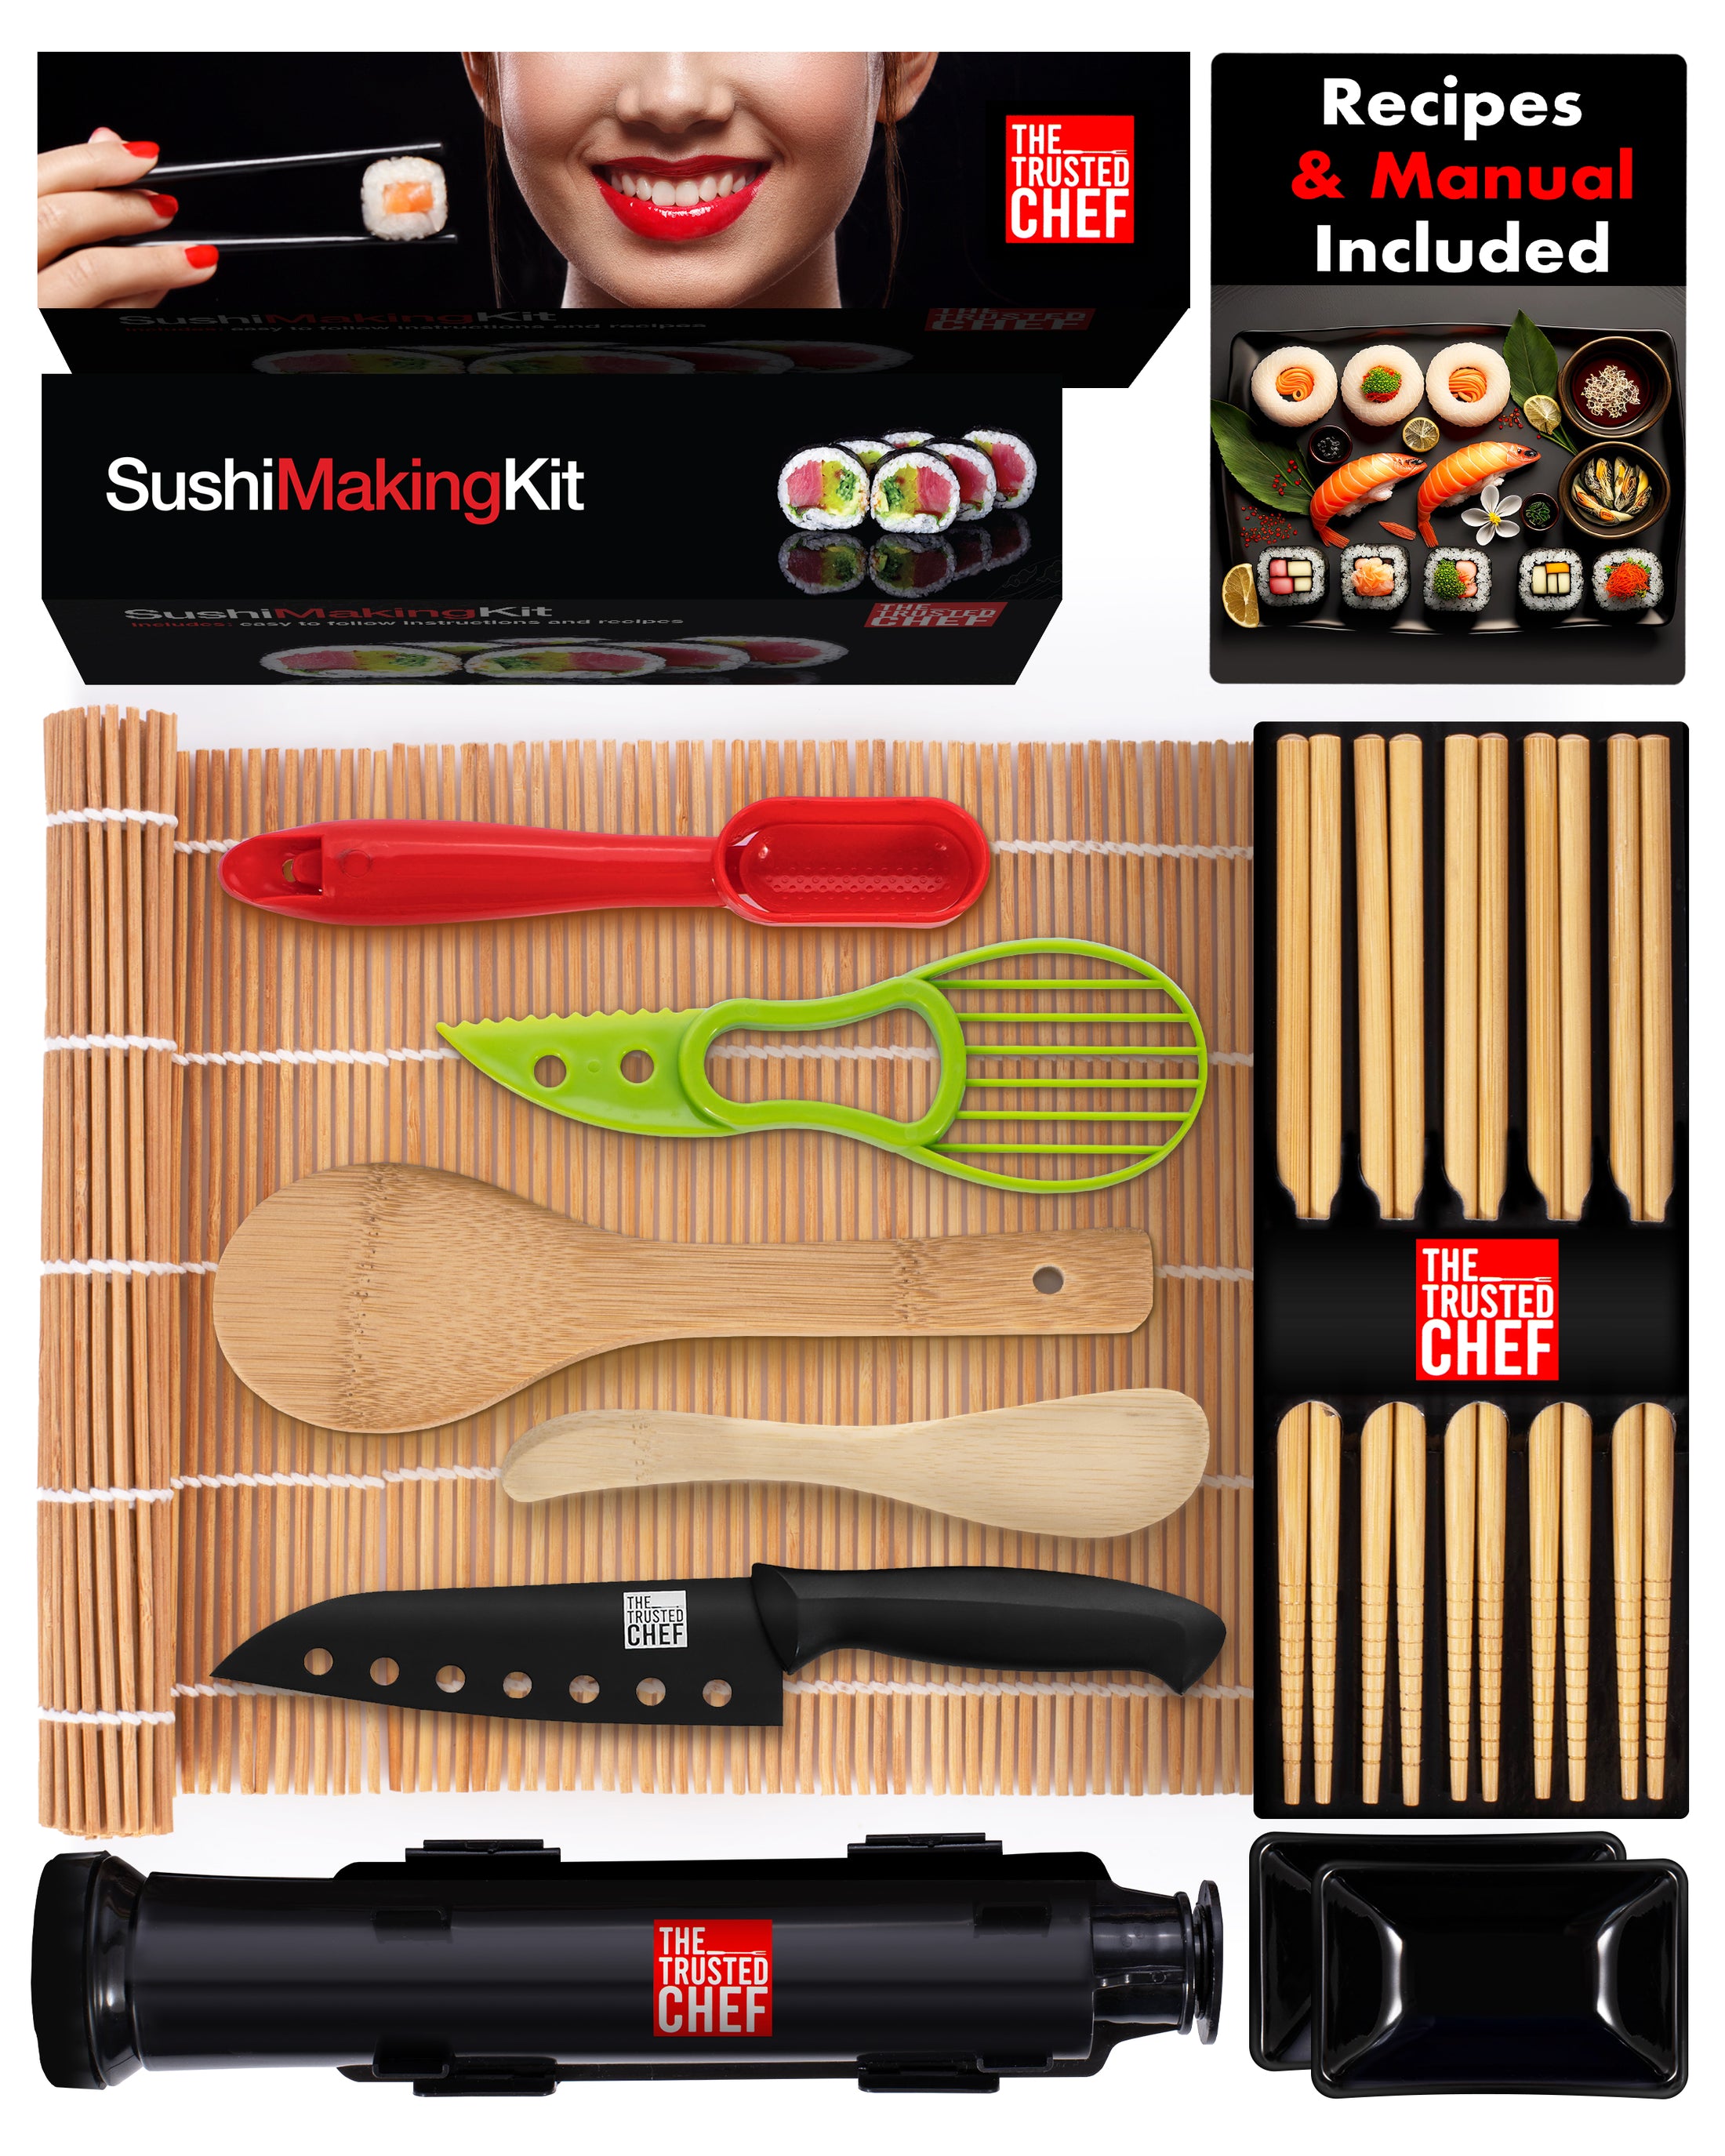 https://www.momjunction.com/wp-content/uploads/product-images/the-trusted-chef-sushi-making-kit_afl758039.jpg